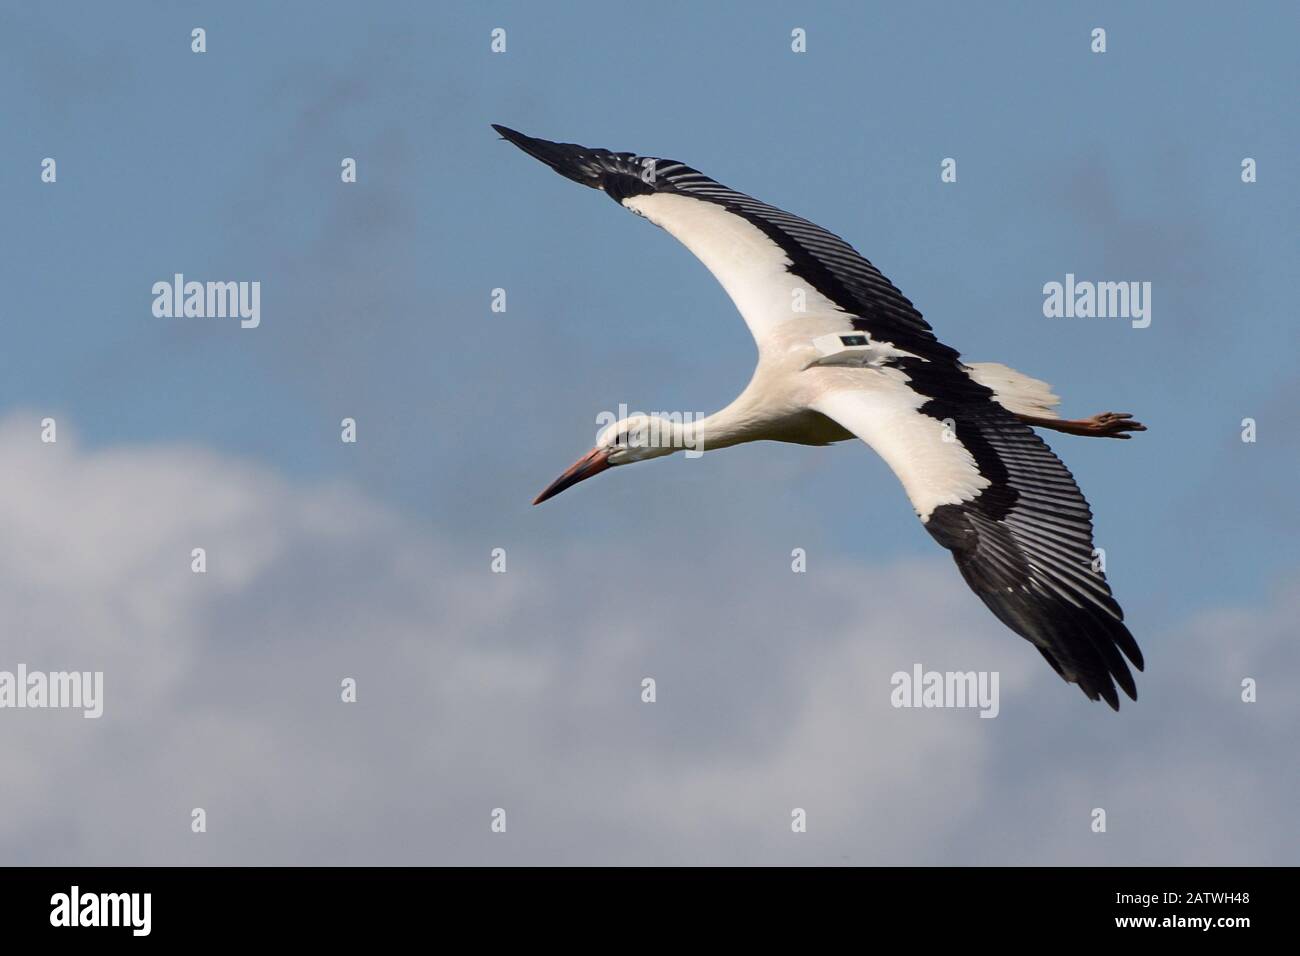 Captive reared juvenile White stork (Ciconia ciconia) with a GPS tracker on its back in flight over the Knepp Estate soon after release, Sussex, UK, August 2019. Stock Photo